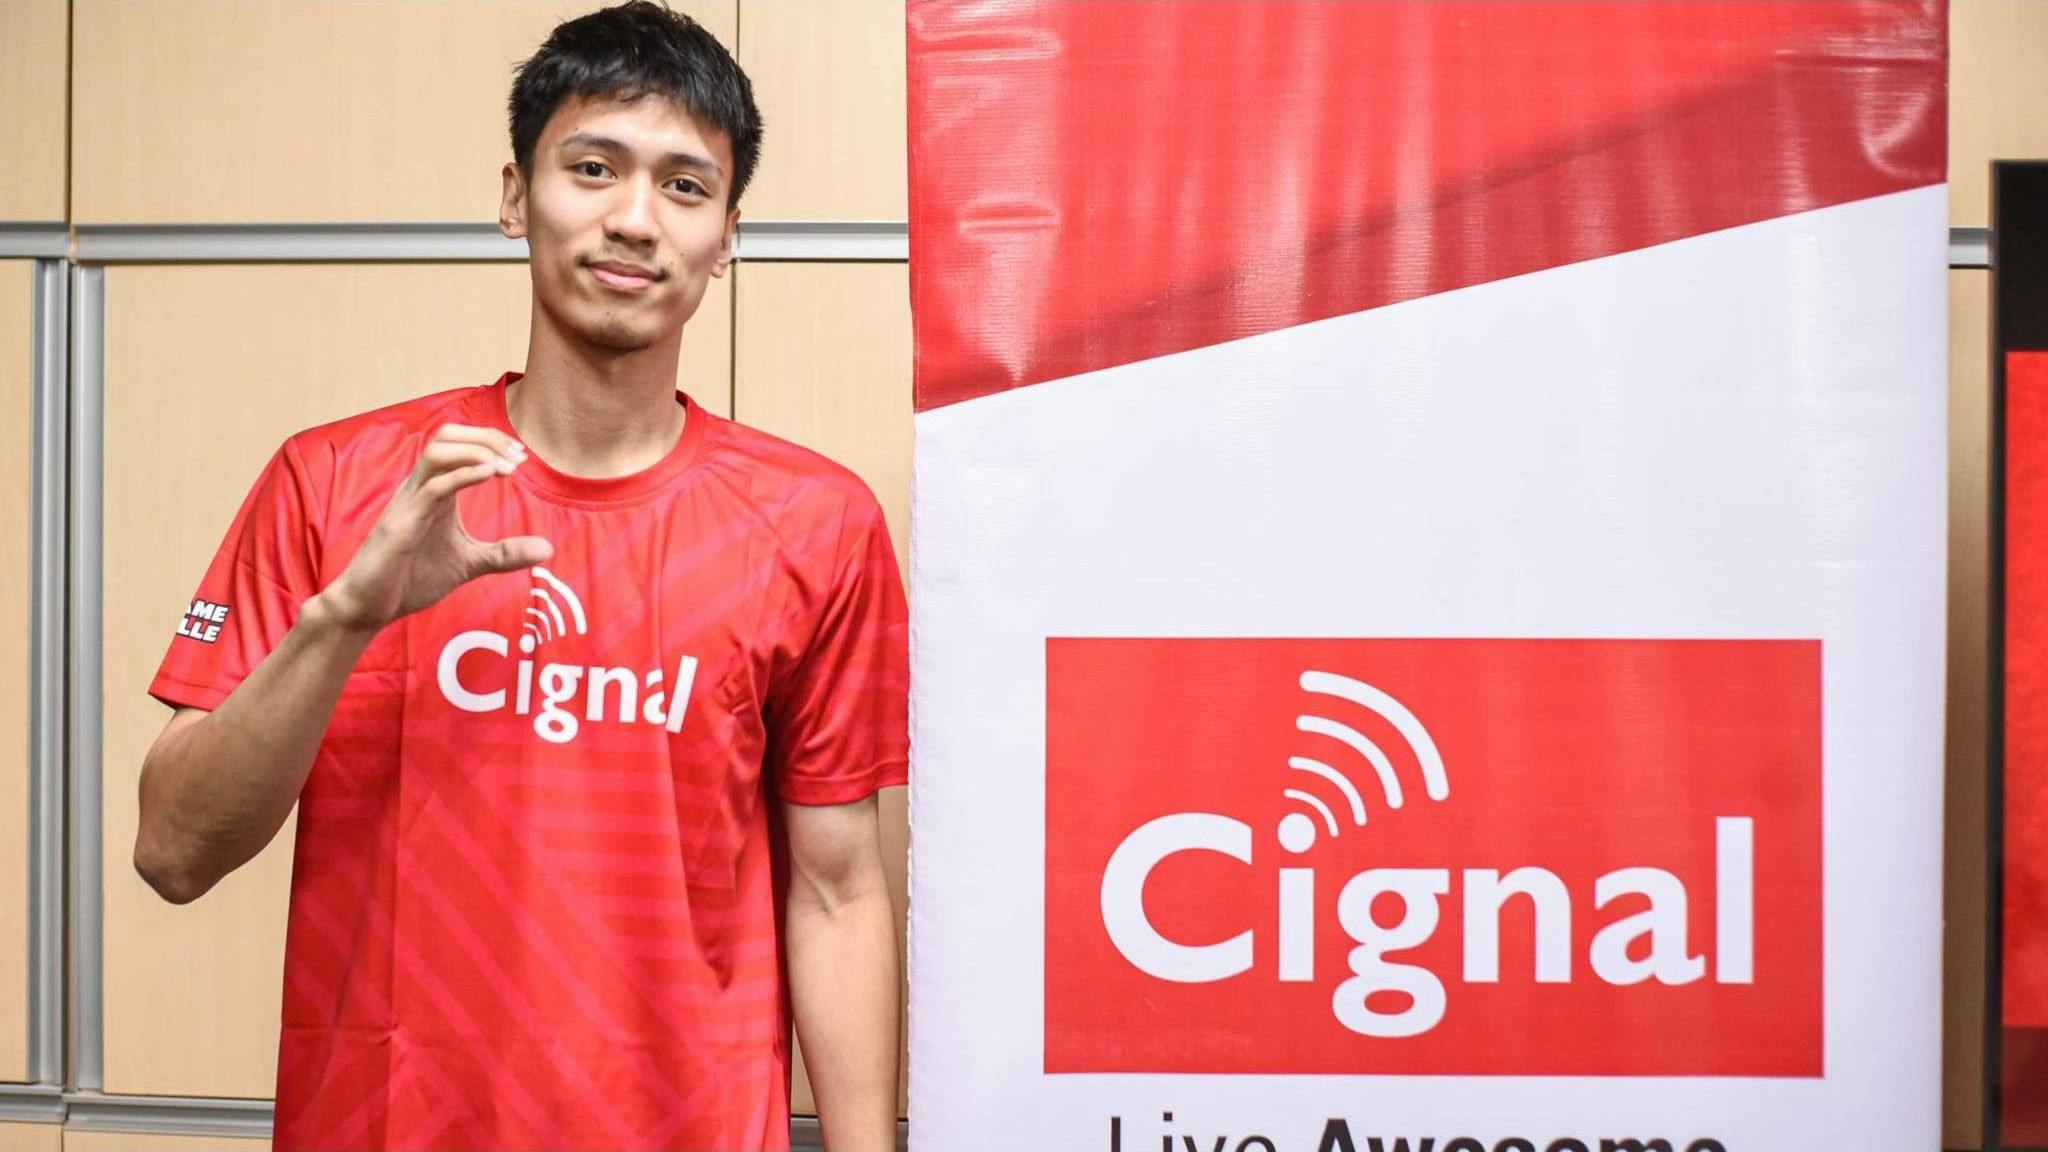 Cignal continues recruitment coup, acquires former DLSU Green Spiker JM Ronquillo
